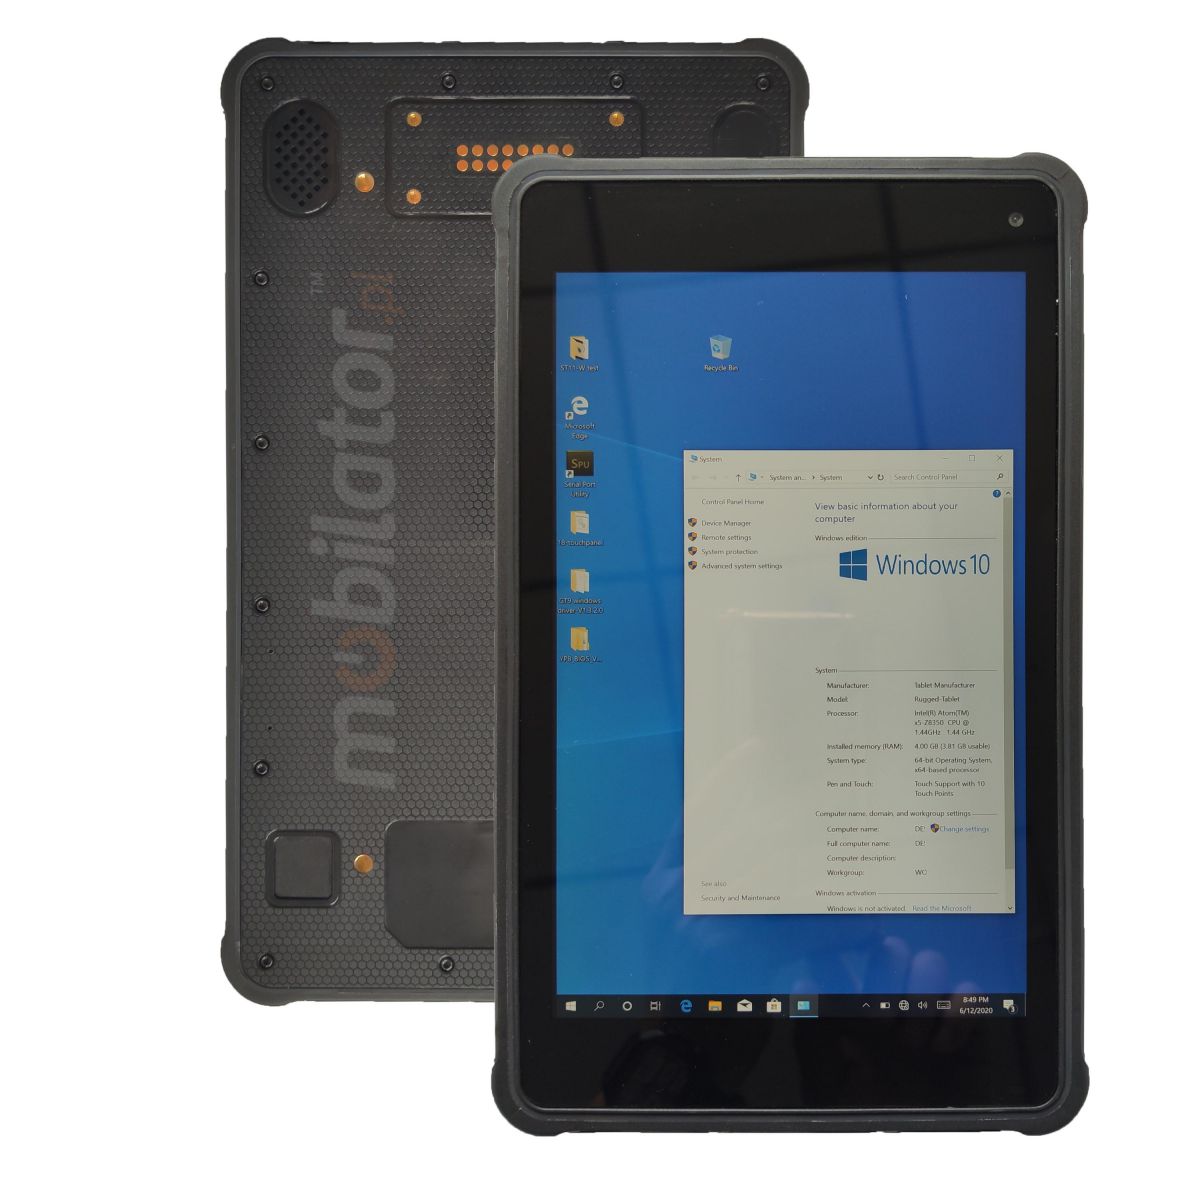 MobiPad ST800B v.5 - Waterproof tablet with UHF RFID scanner and 2D barcode reader Honeywell N3680, NFC, 4G and Bluetooth 4.0, 4GB Ram and 64GB ROM 